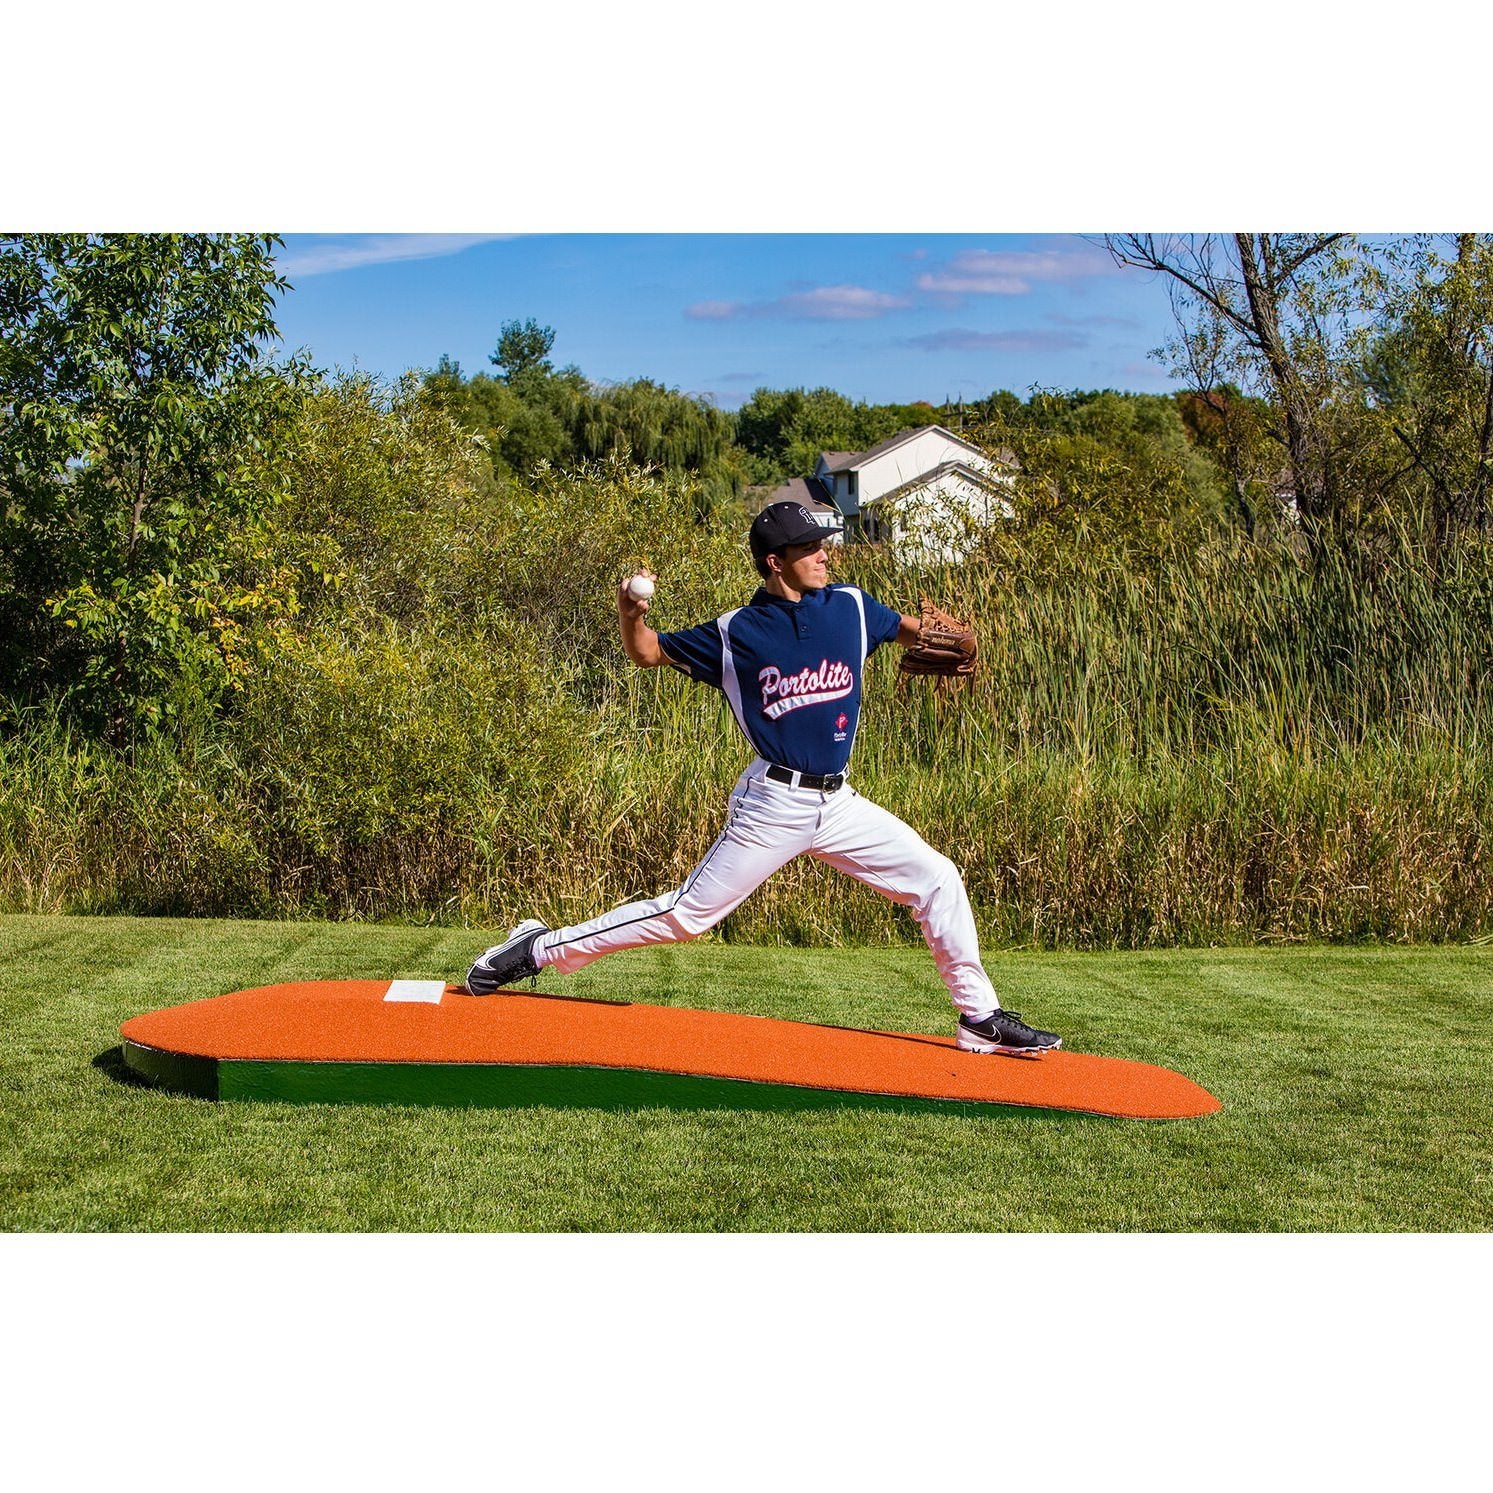 Portolite 10" Portable Practice Pitching Mound clay pitcher stride side view